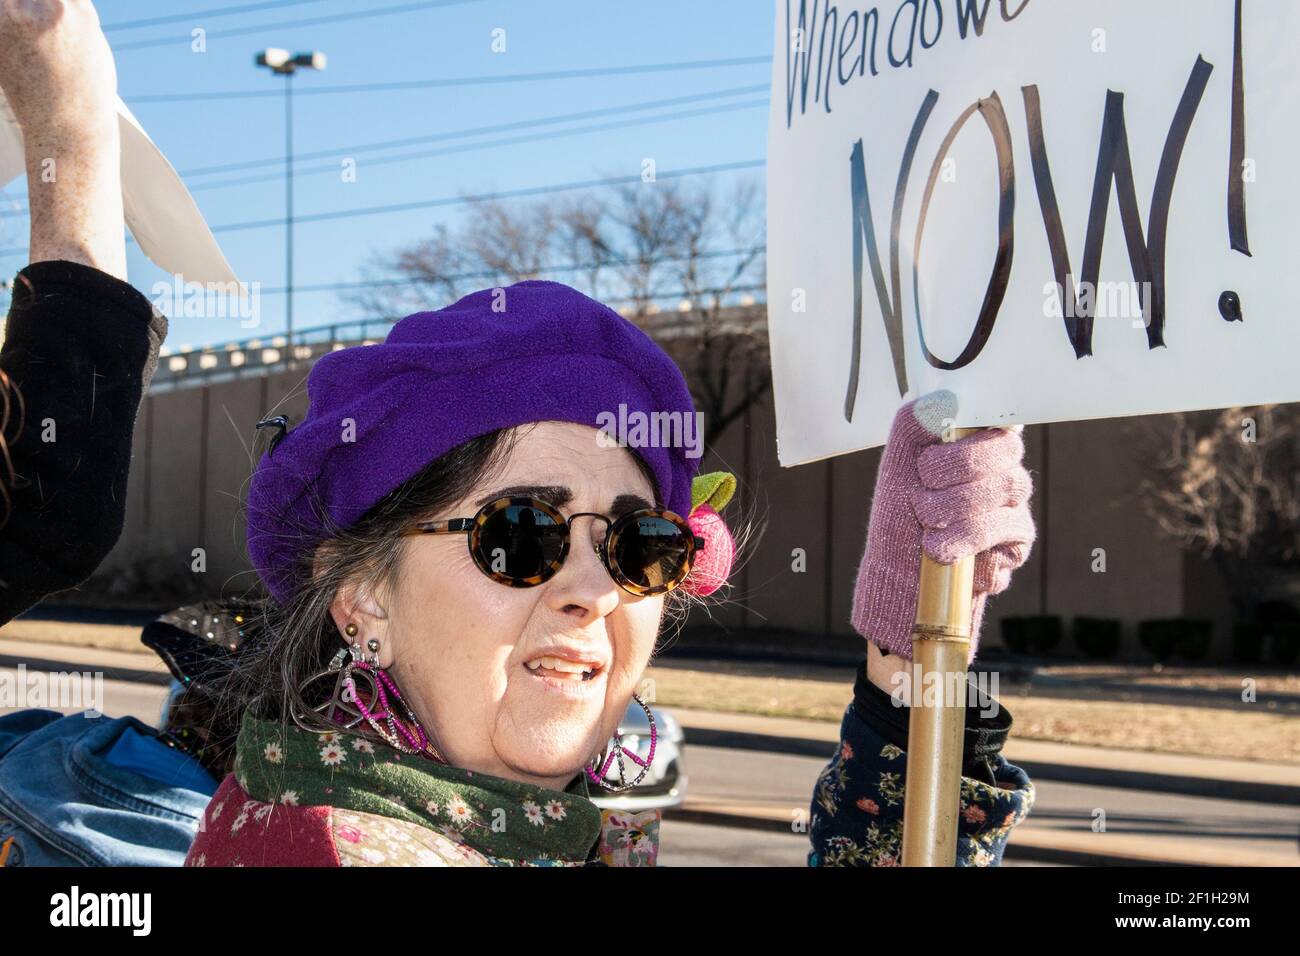 01-04-2020 Tulsa USA - Worried looking senior citizen woman with colorful clothing and peace earrings at war protest with sign Stock Photo